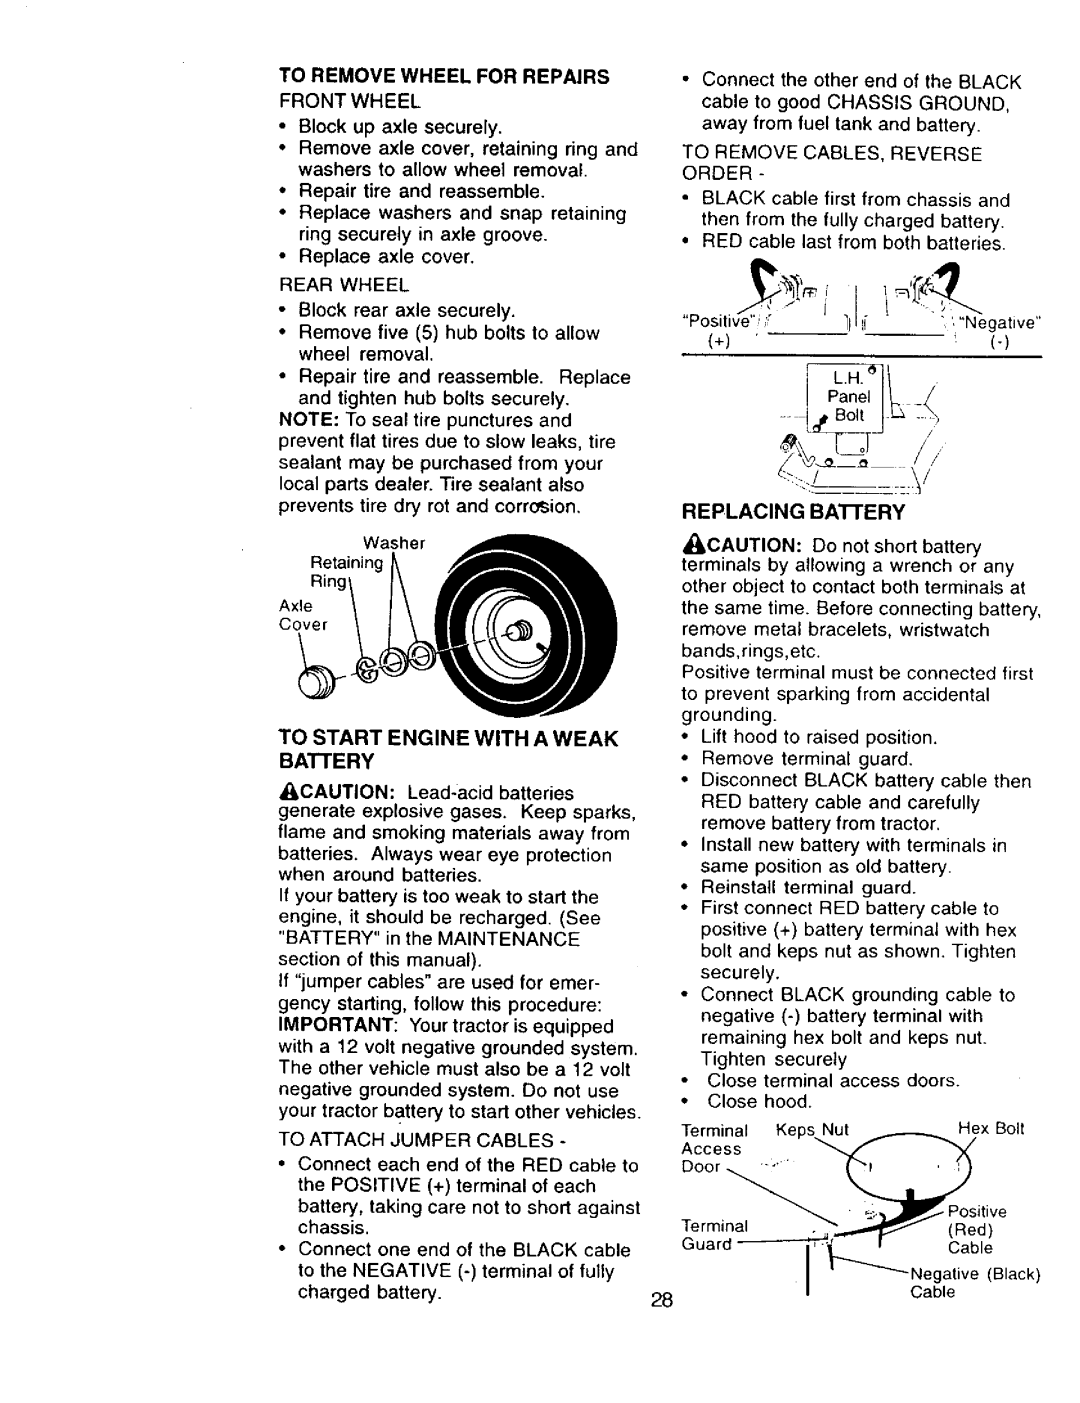 Craftsman 917.273322 owner manual IB,ack, To Start Engine With A Weak Battery, Replacing Battery 